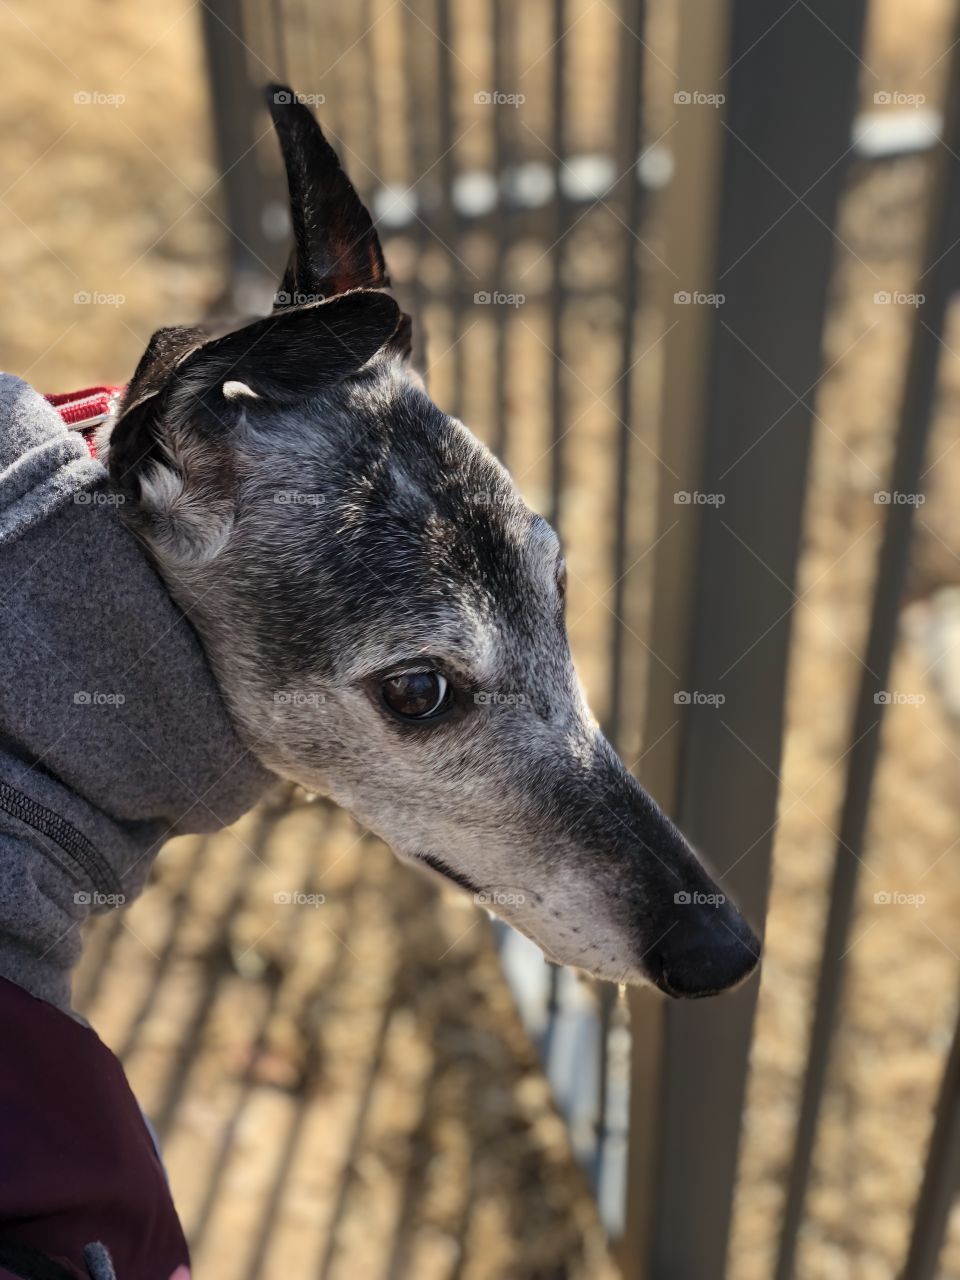 Greyhound in coat looking back with what some may call a judgmental stare